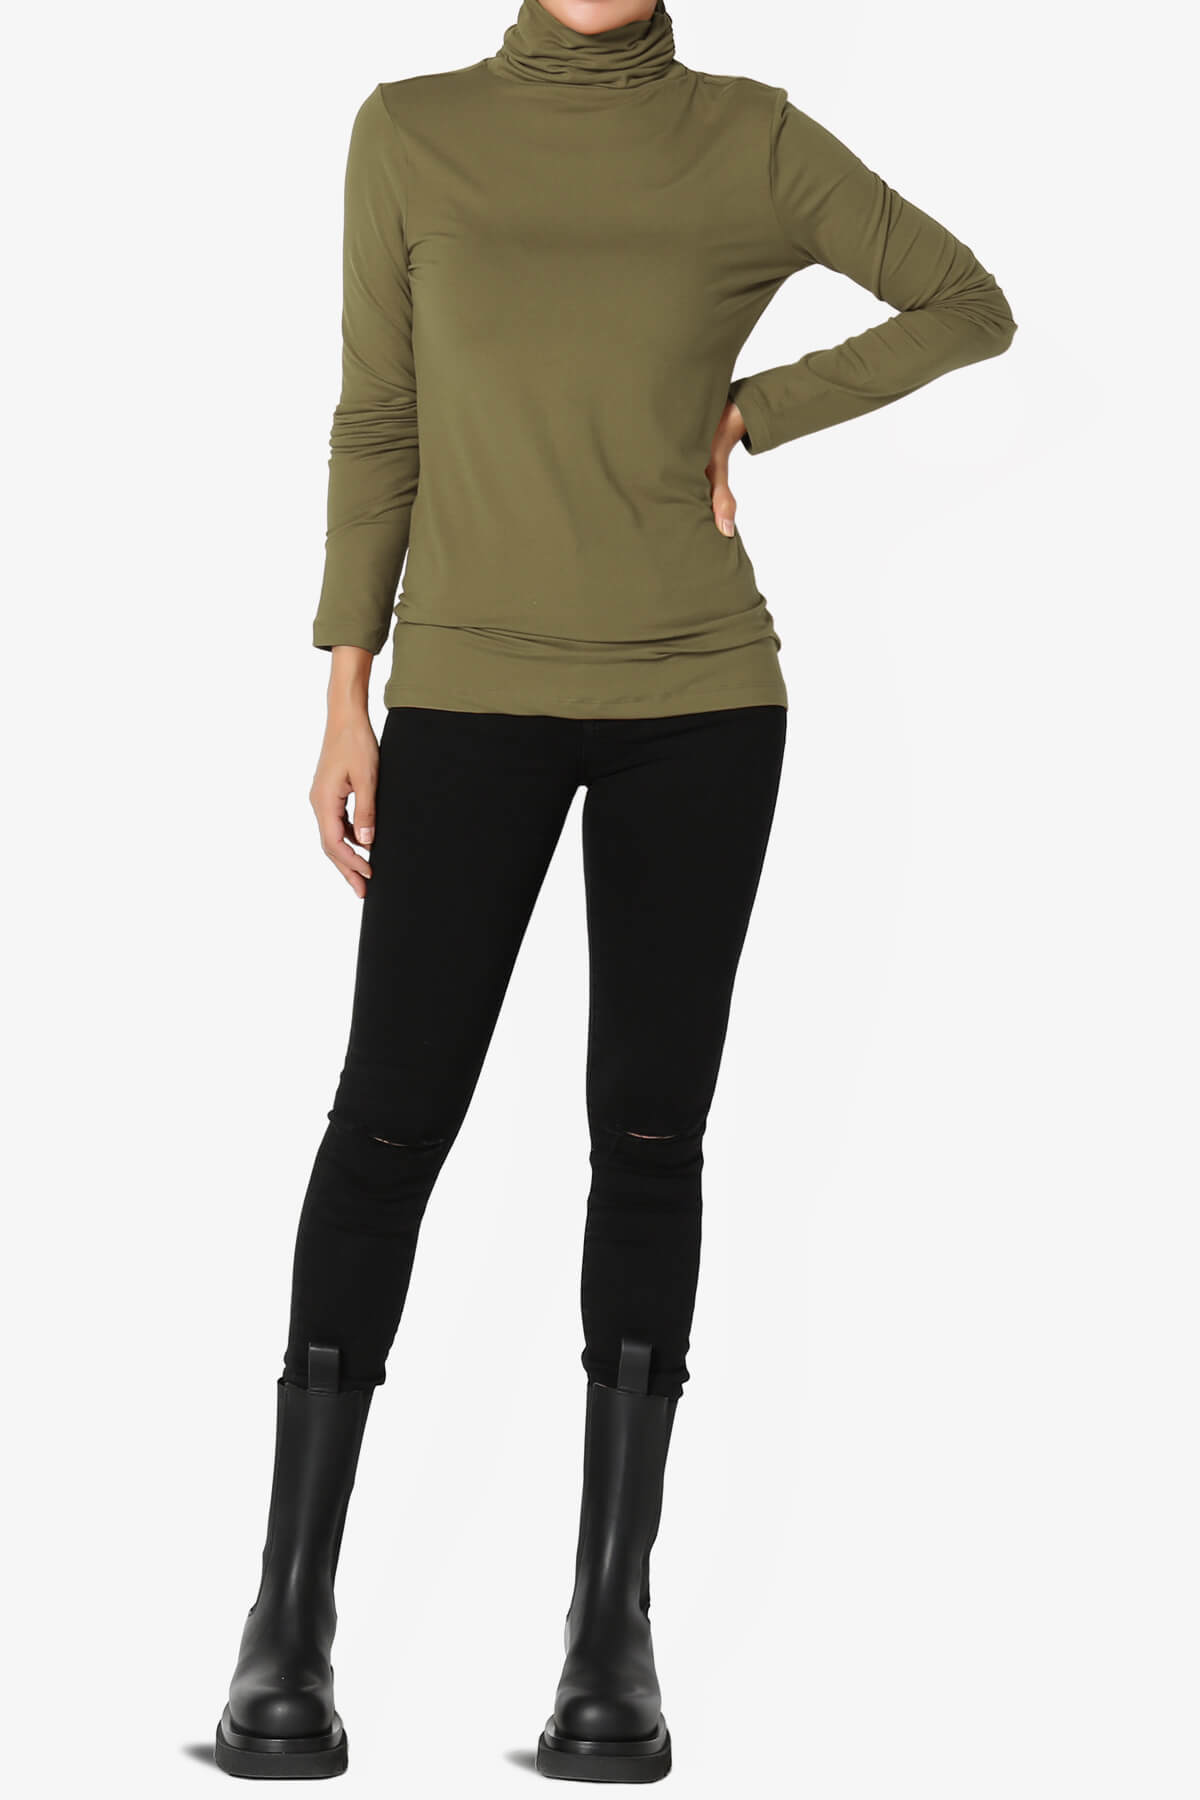 Load image into Gallery viewer, Viable Ruched Turtle Neck Long Sleeve Top OLIVE KHAKI_6
